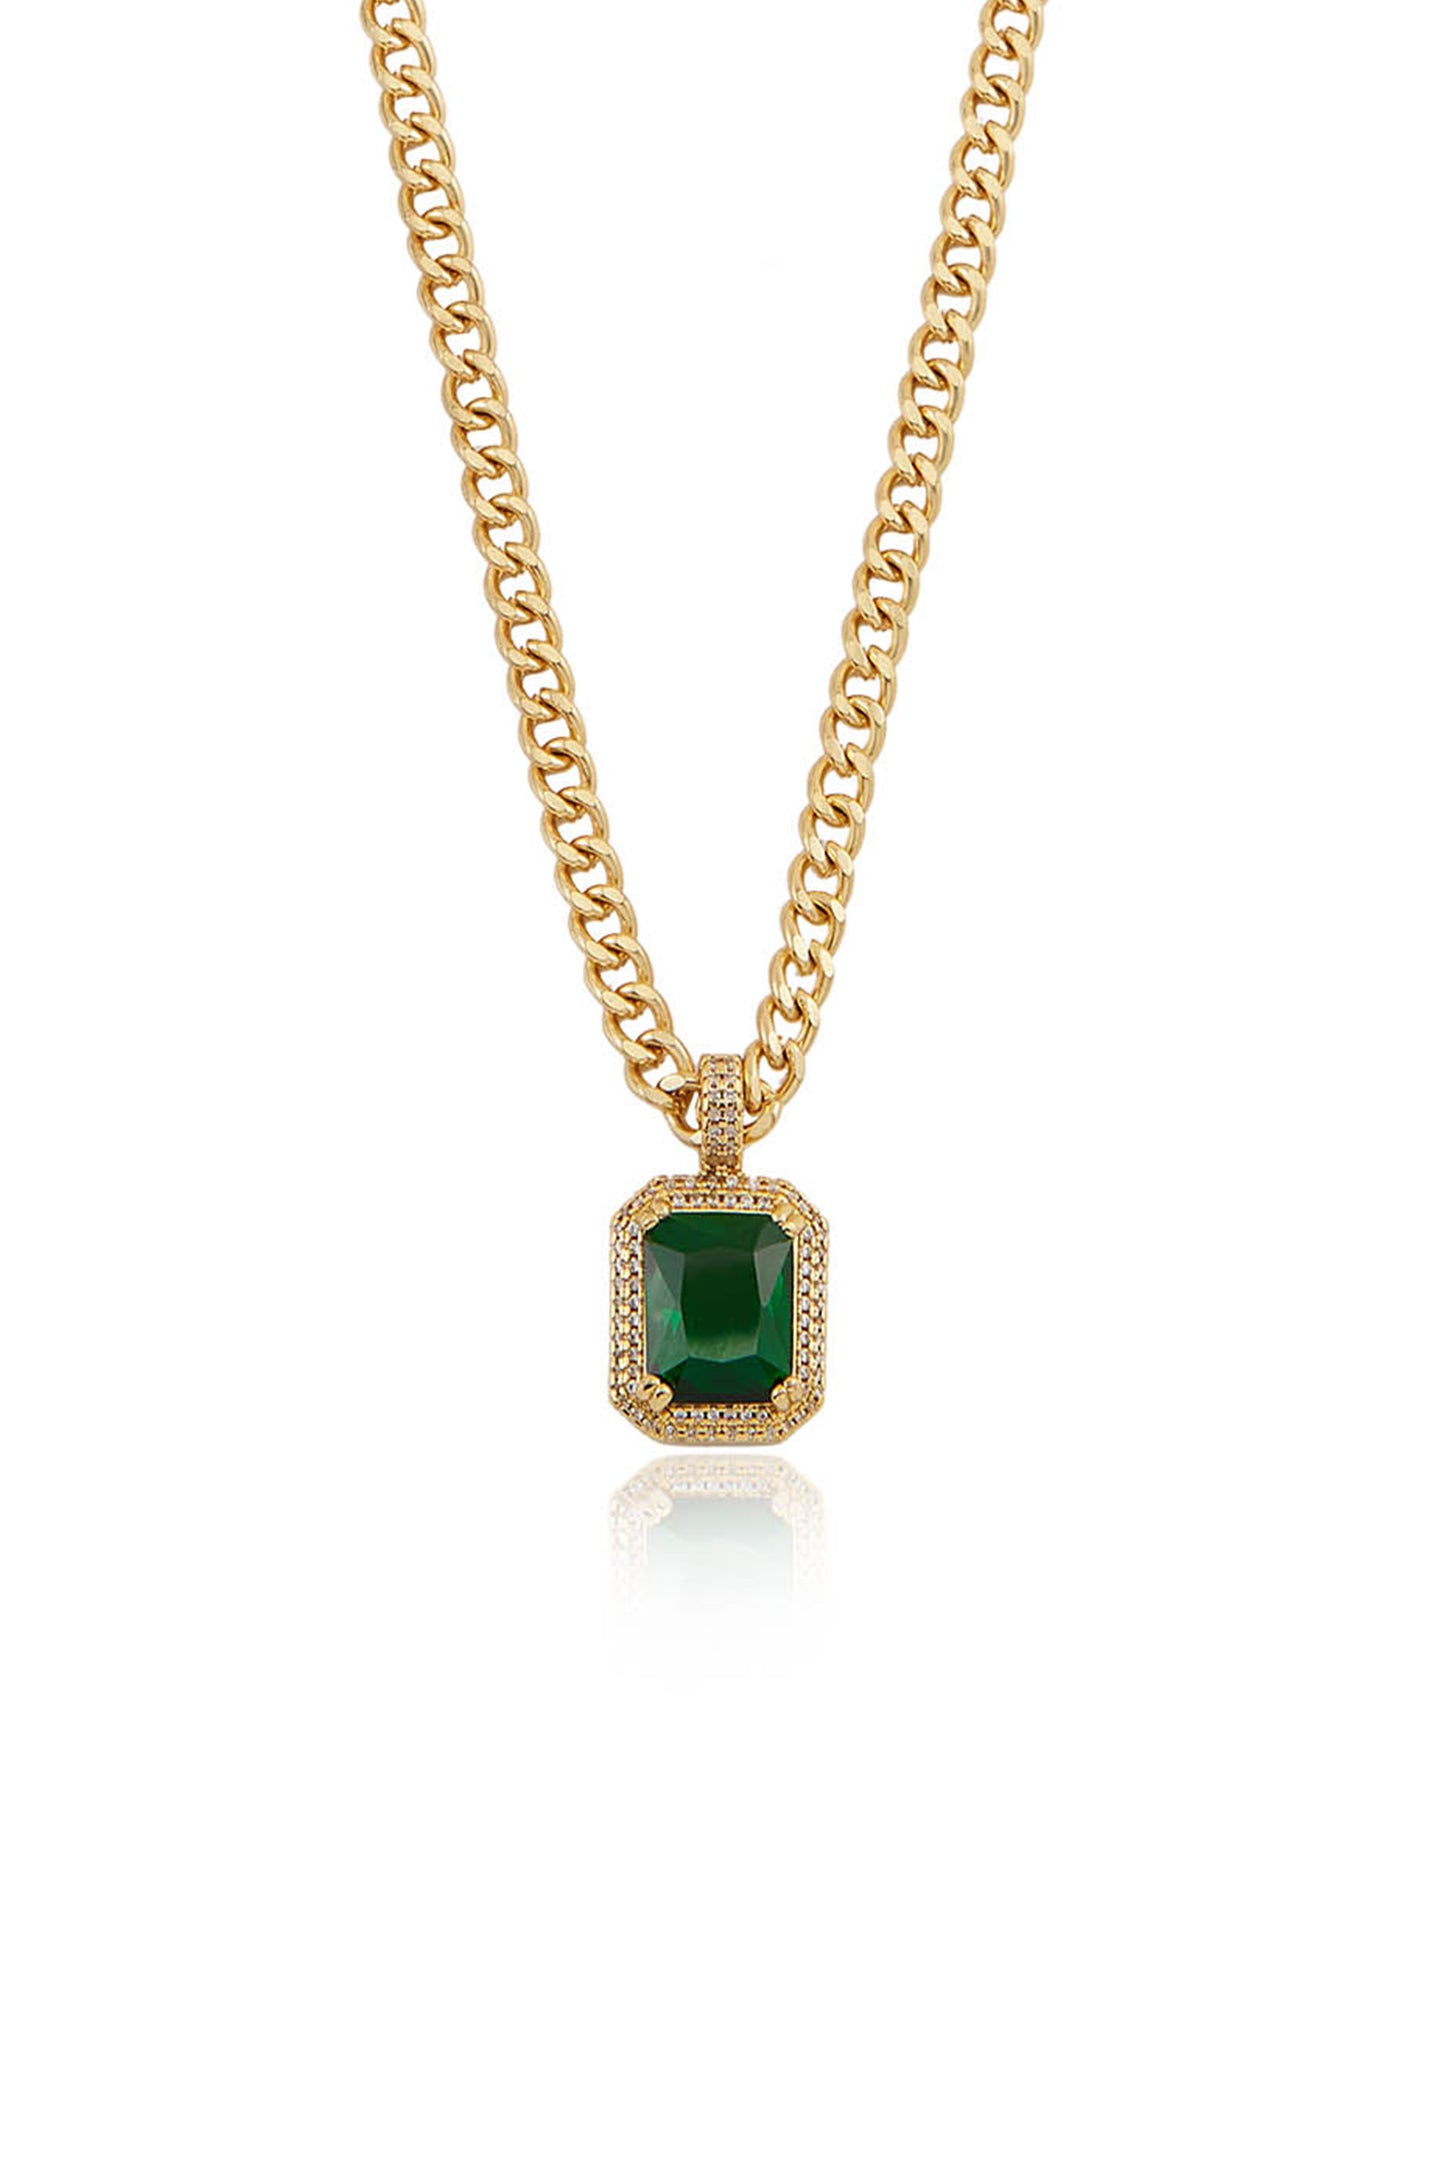 Emerald Stone Pendant 18k Gold Plated Link Necklace close